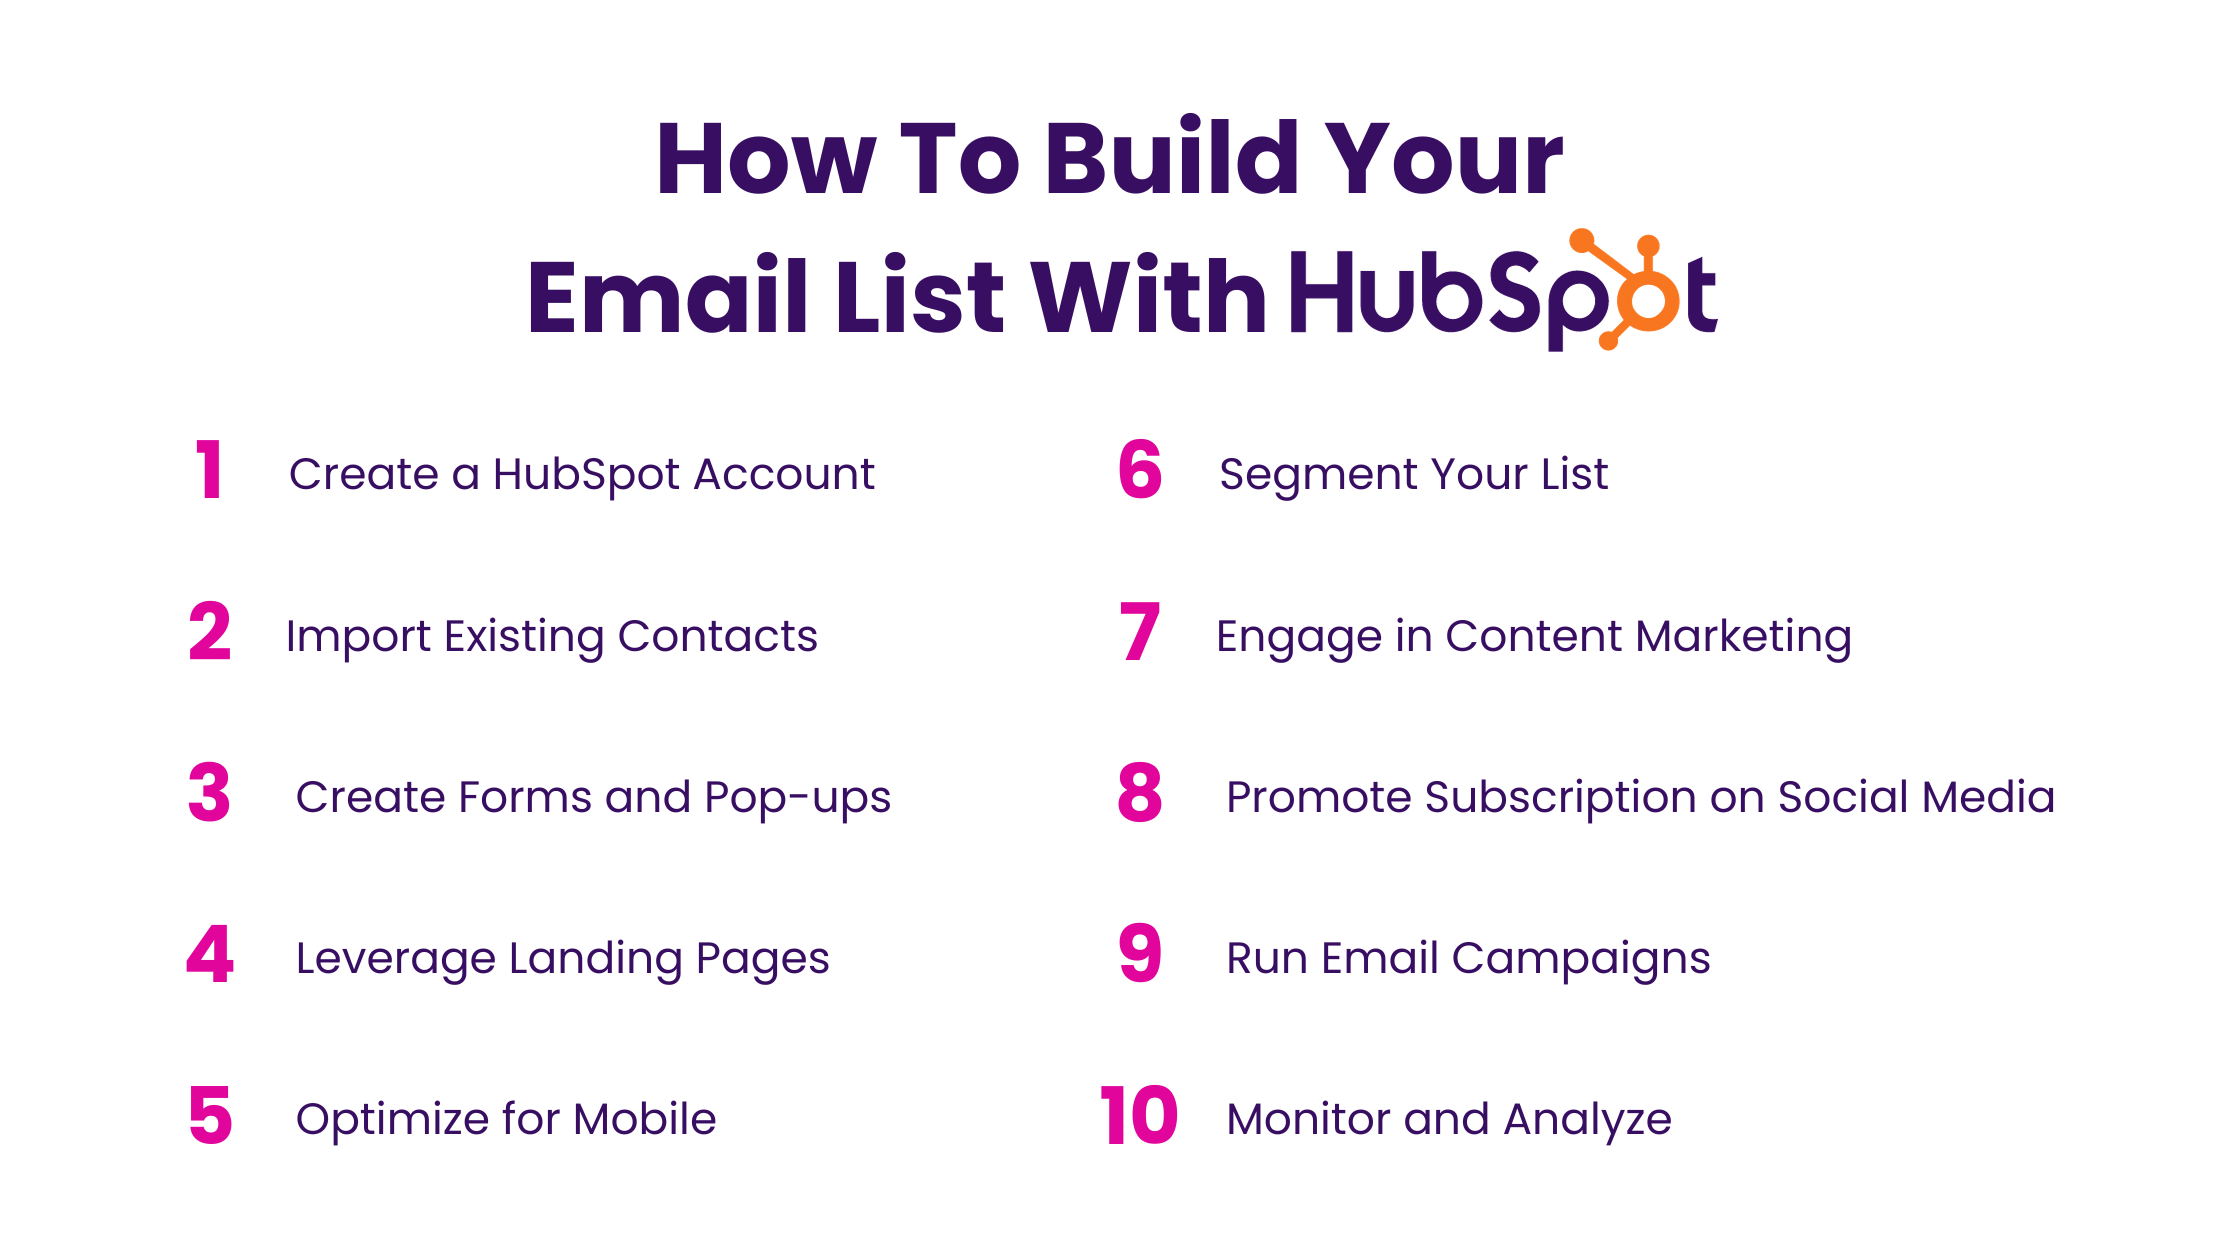 How To Build Your Email List With HubSpot